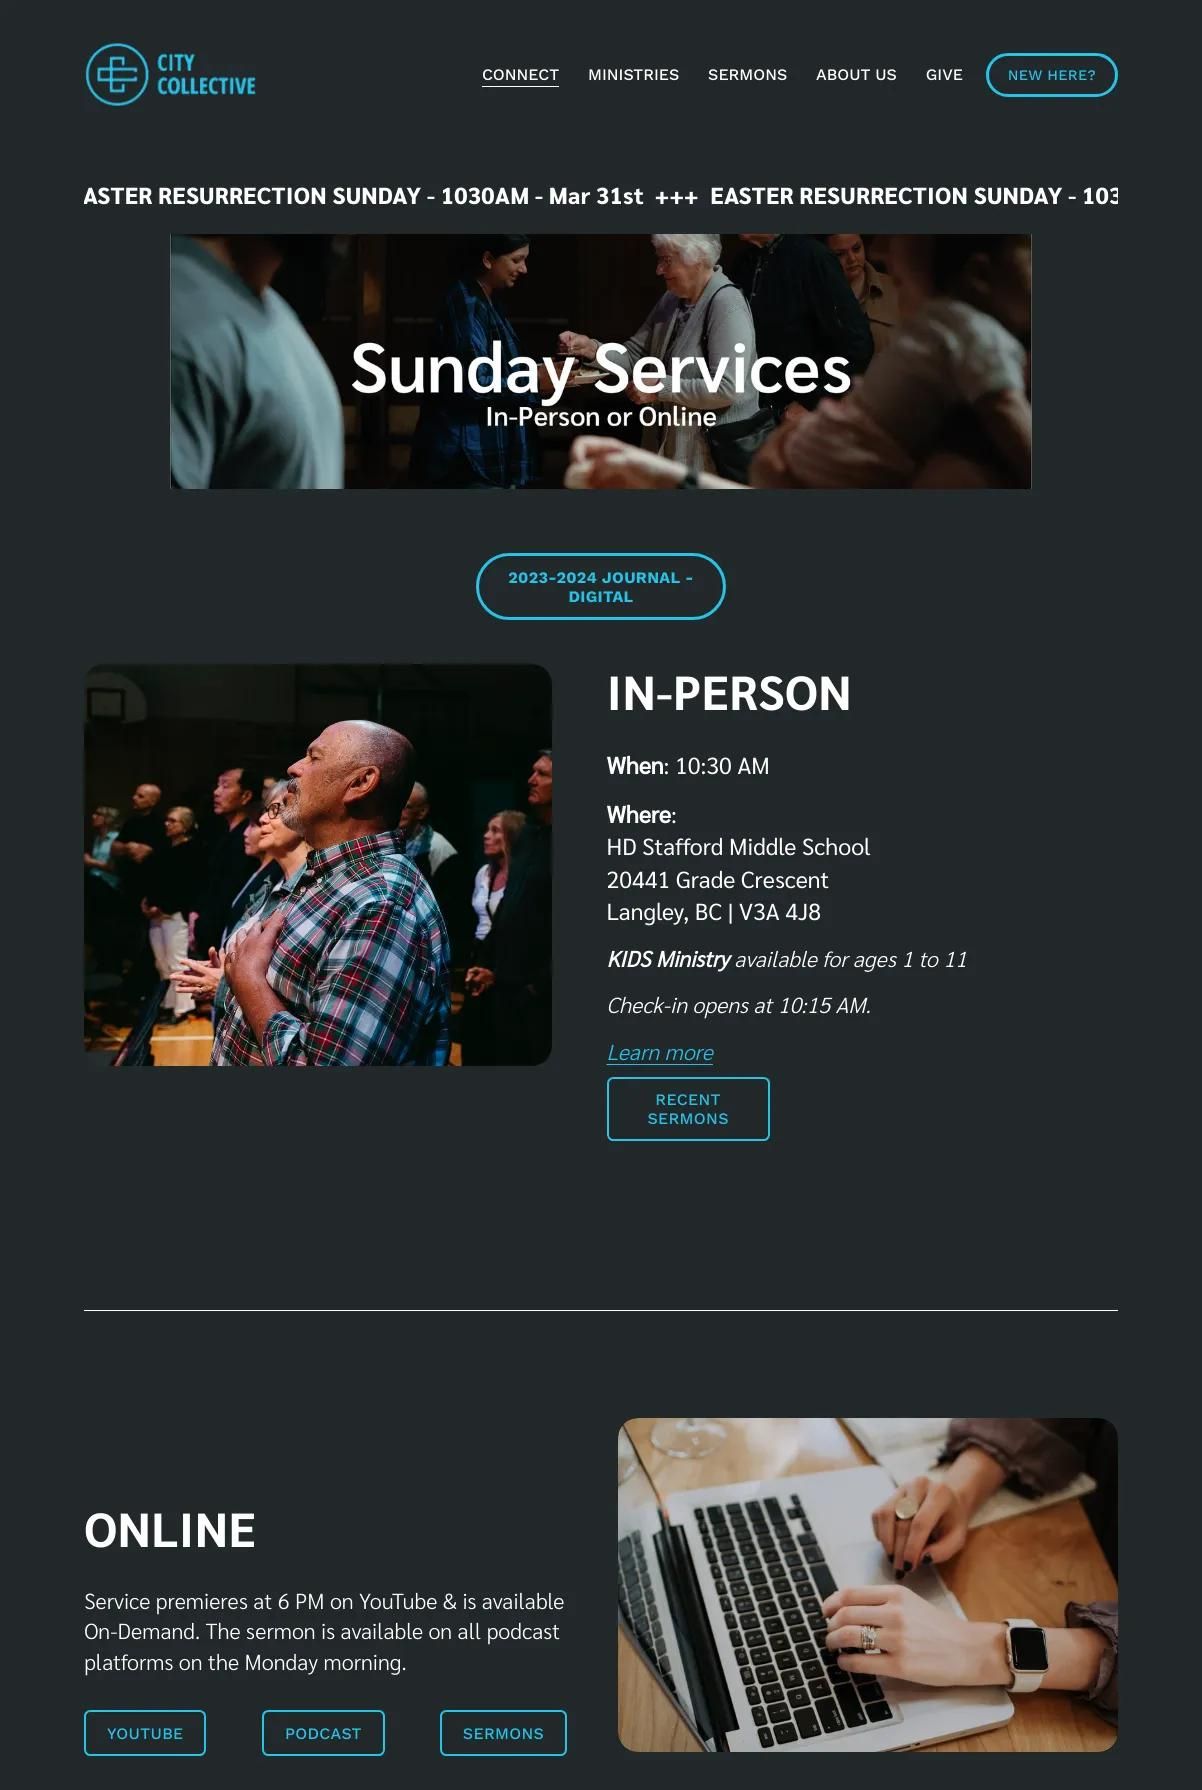 Screenshot 2 of City Collective Church (Example Squarespace Church Website)